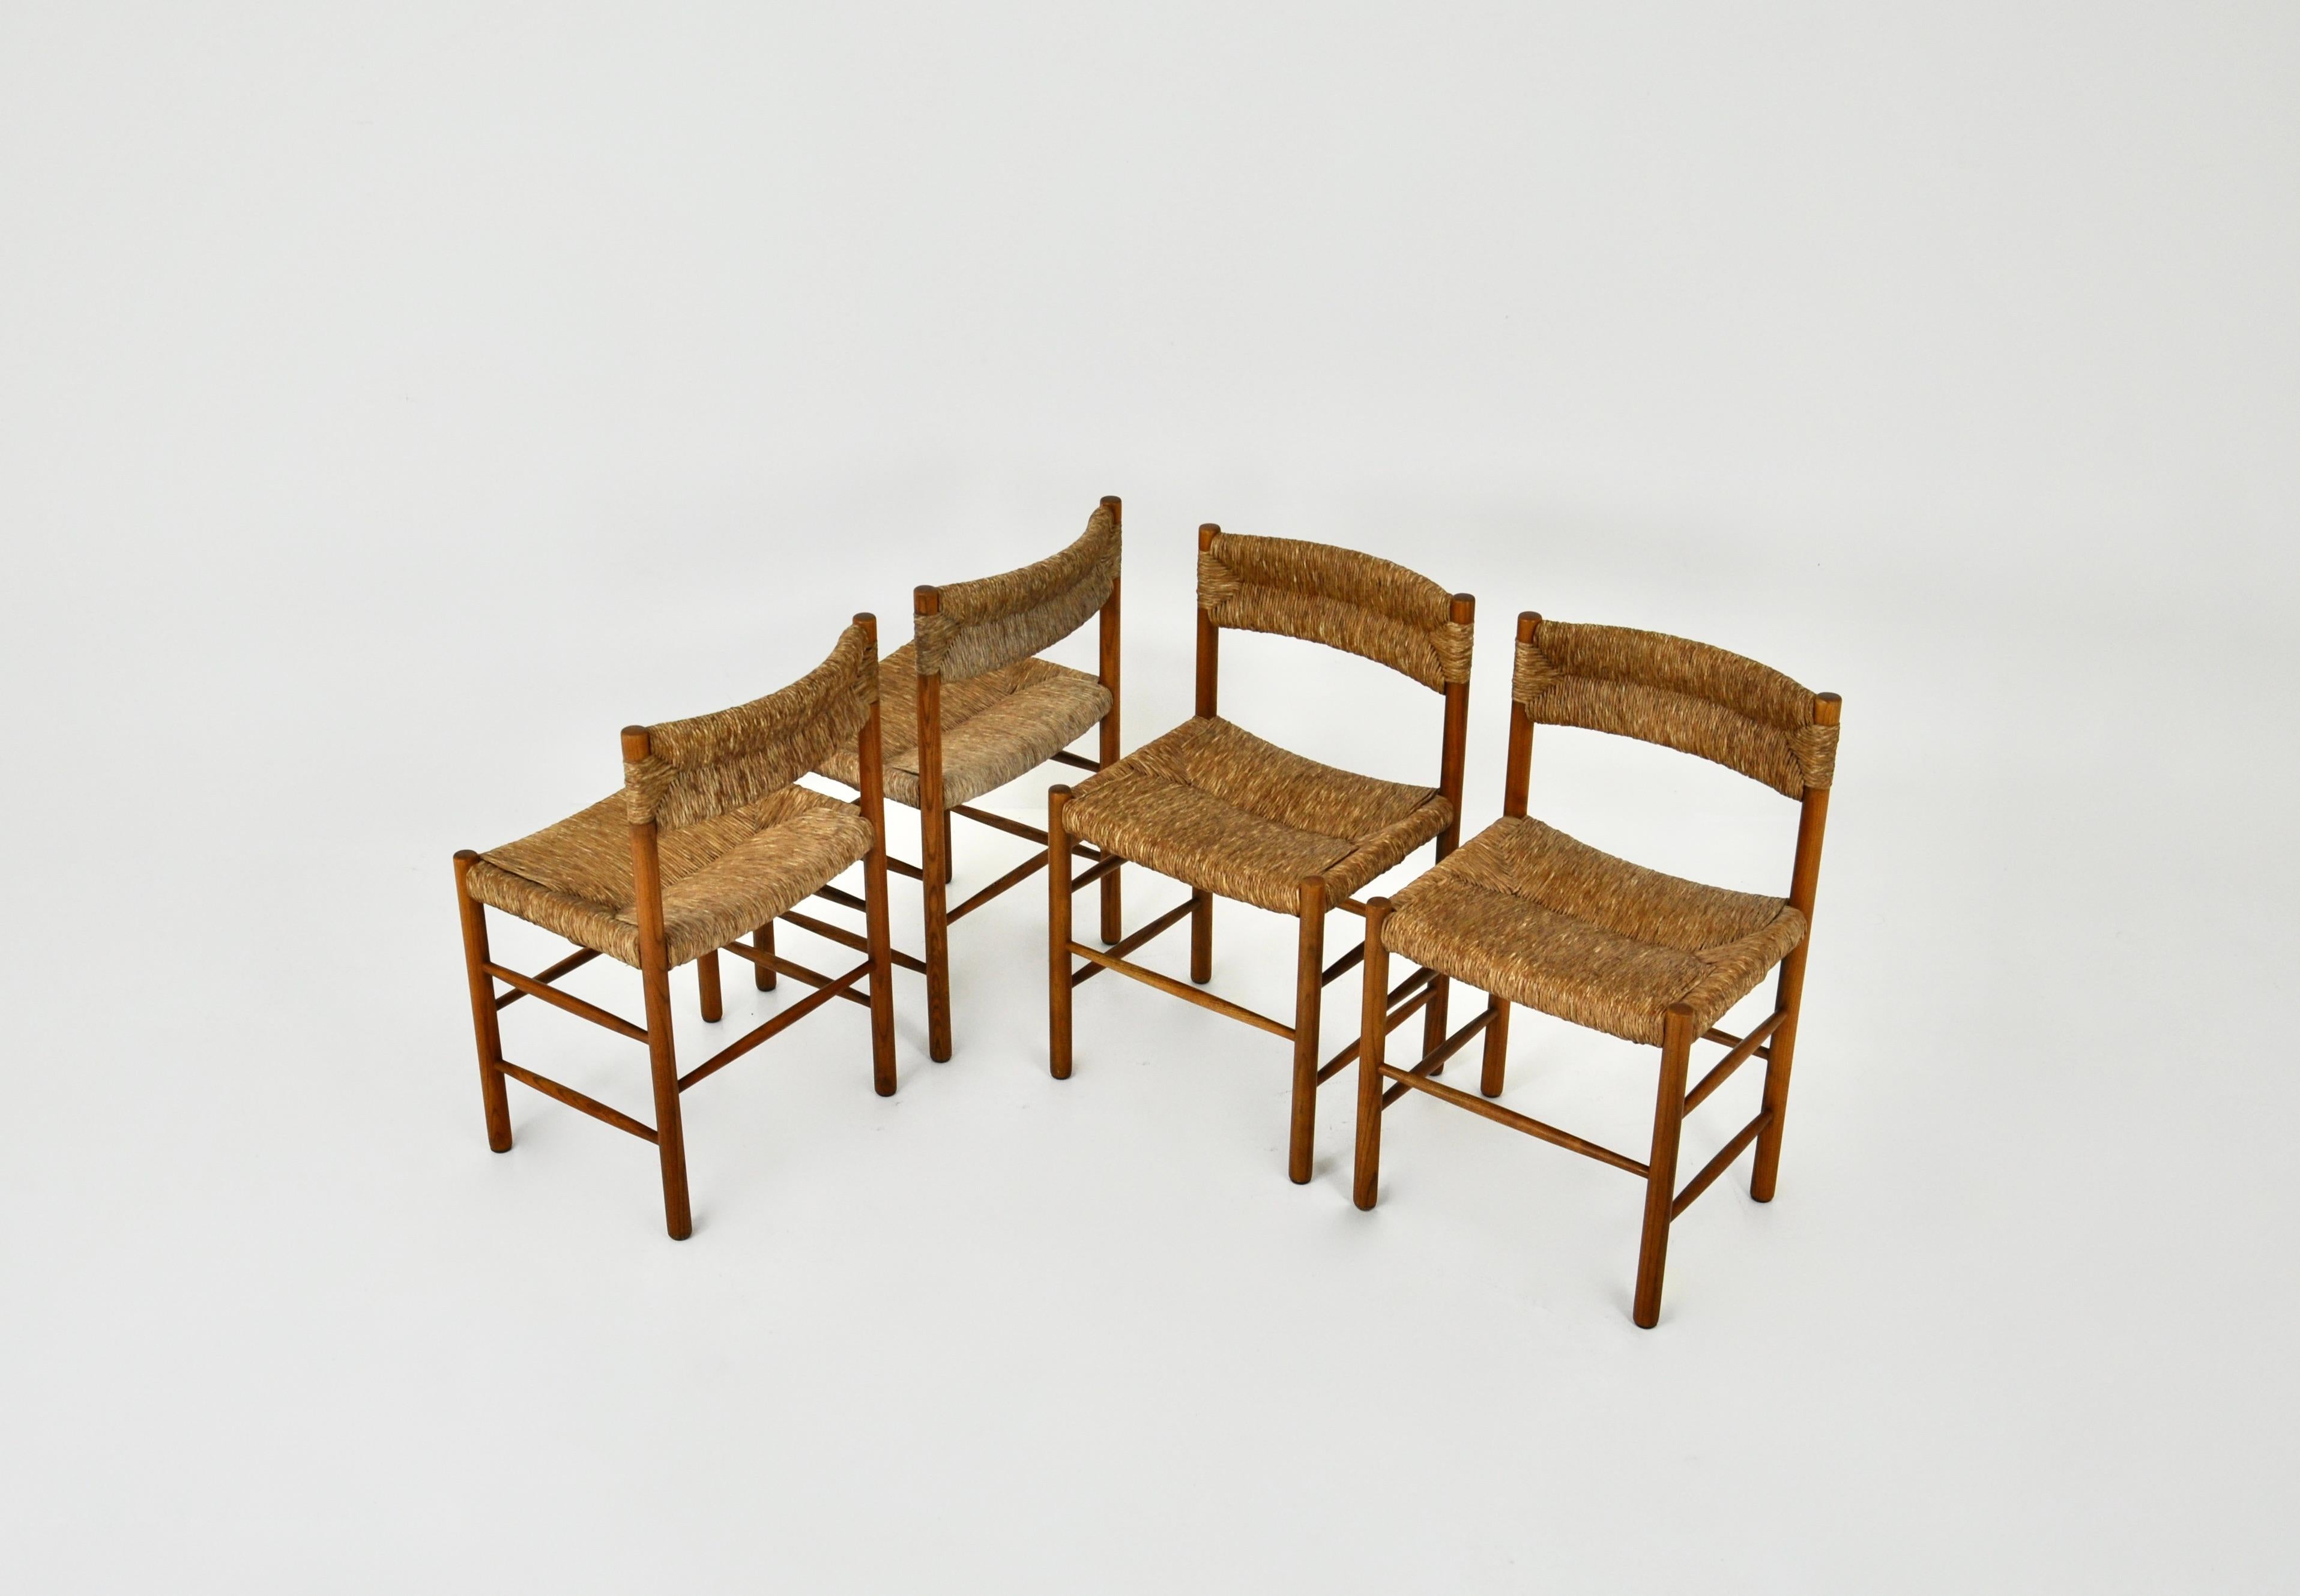 Set of 4 chairs in wood and straw made by Charlotte Perriand in the 1950s. Seat height: 46cm Wear due to time and age of the chairs.
